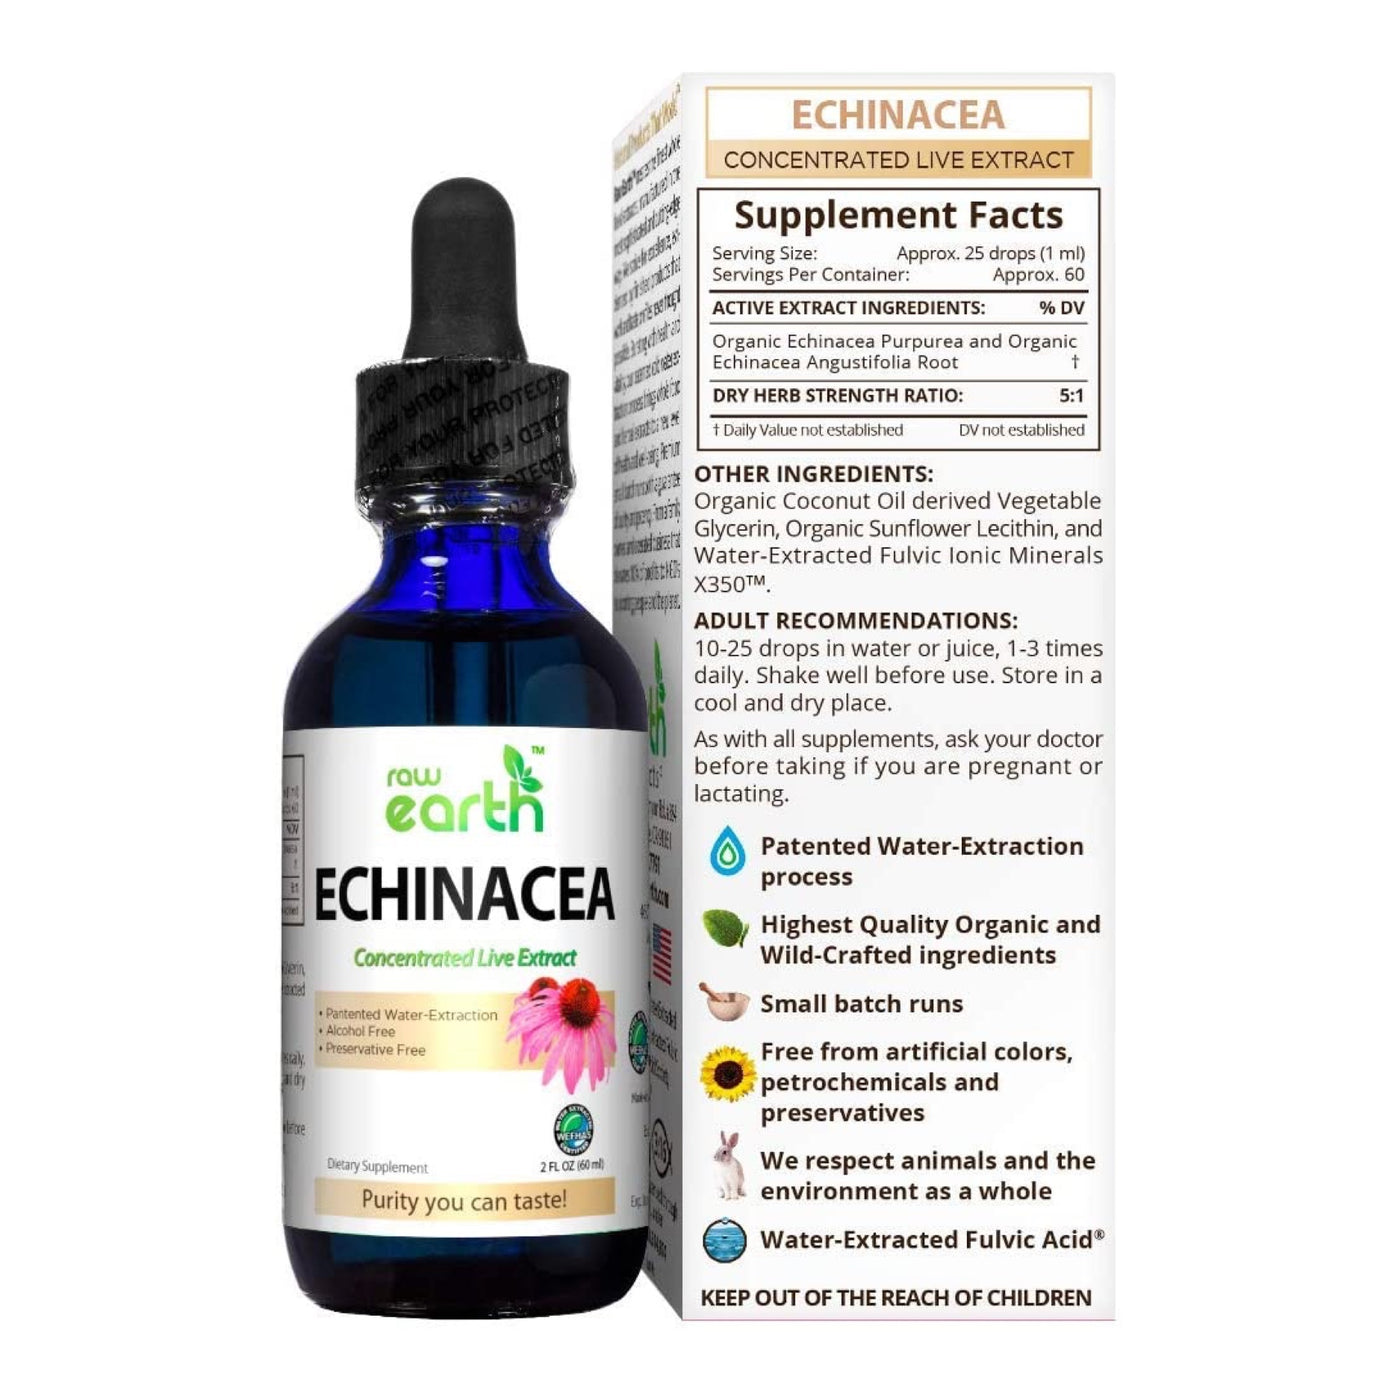 Echinacea Extract 2oz - Raw Earth Extracts